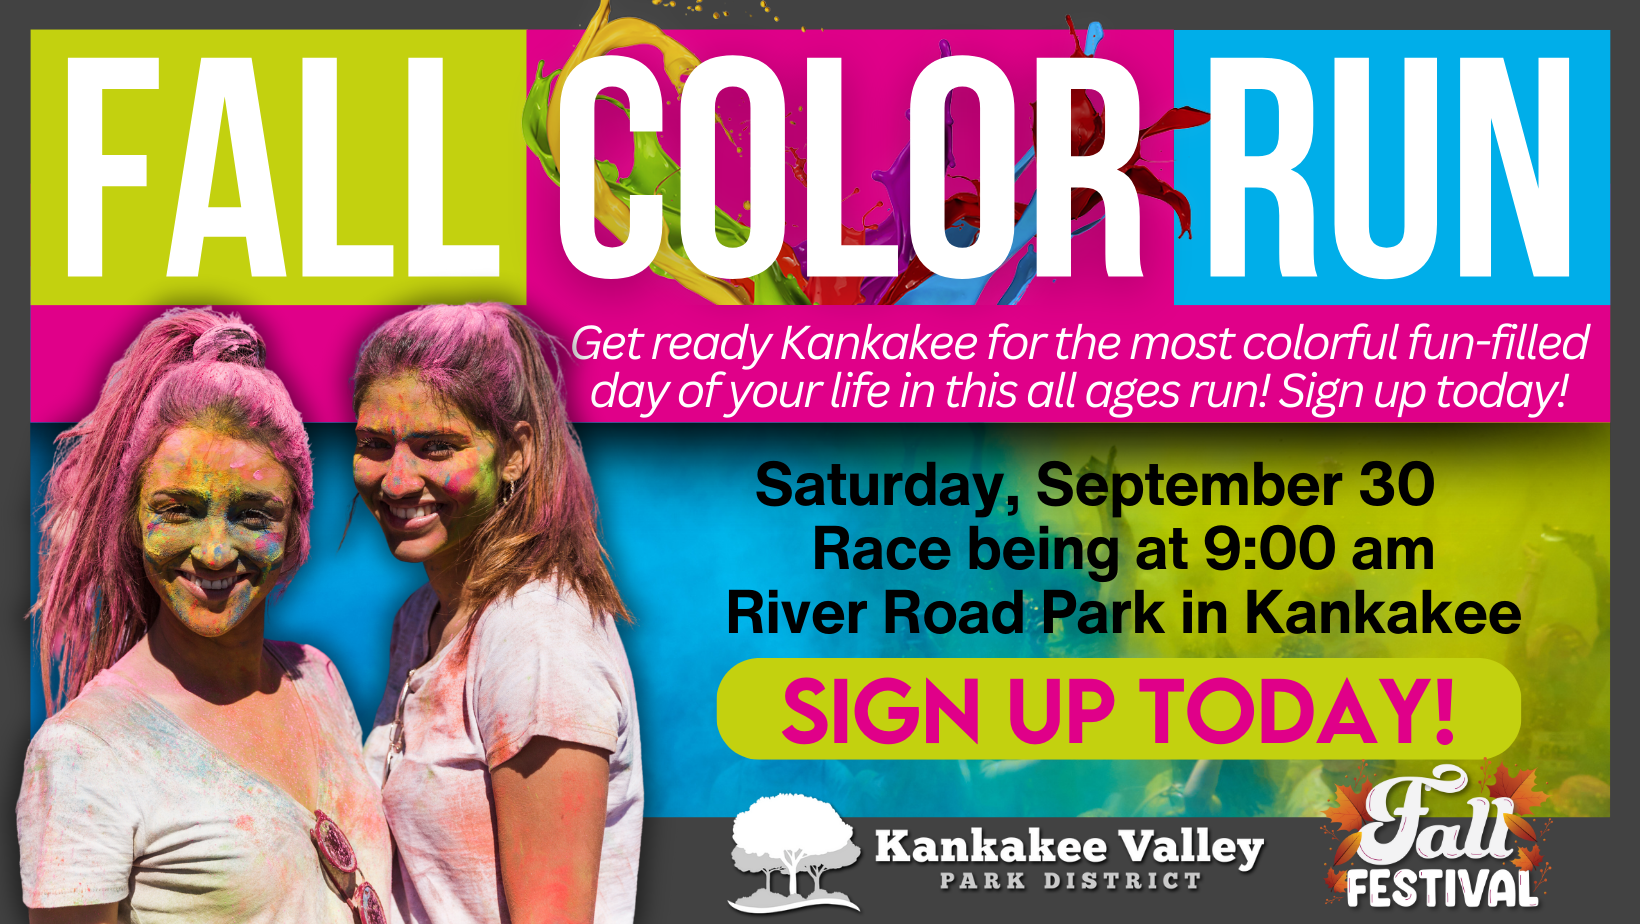 Kankakee Valley Park District's Fall Color Run